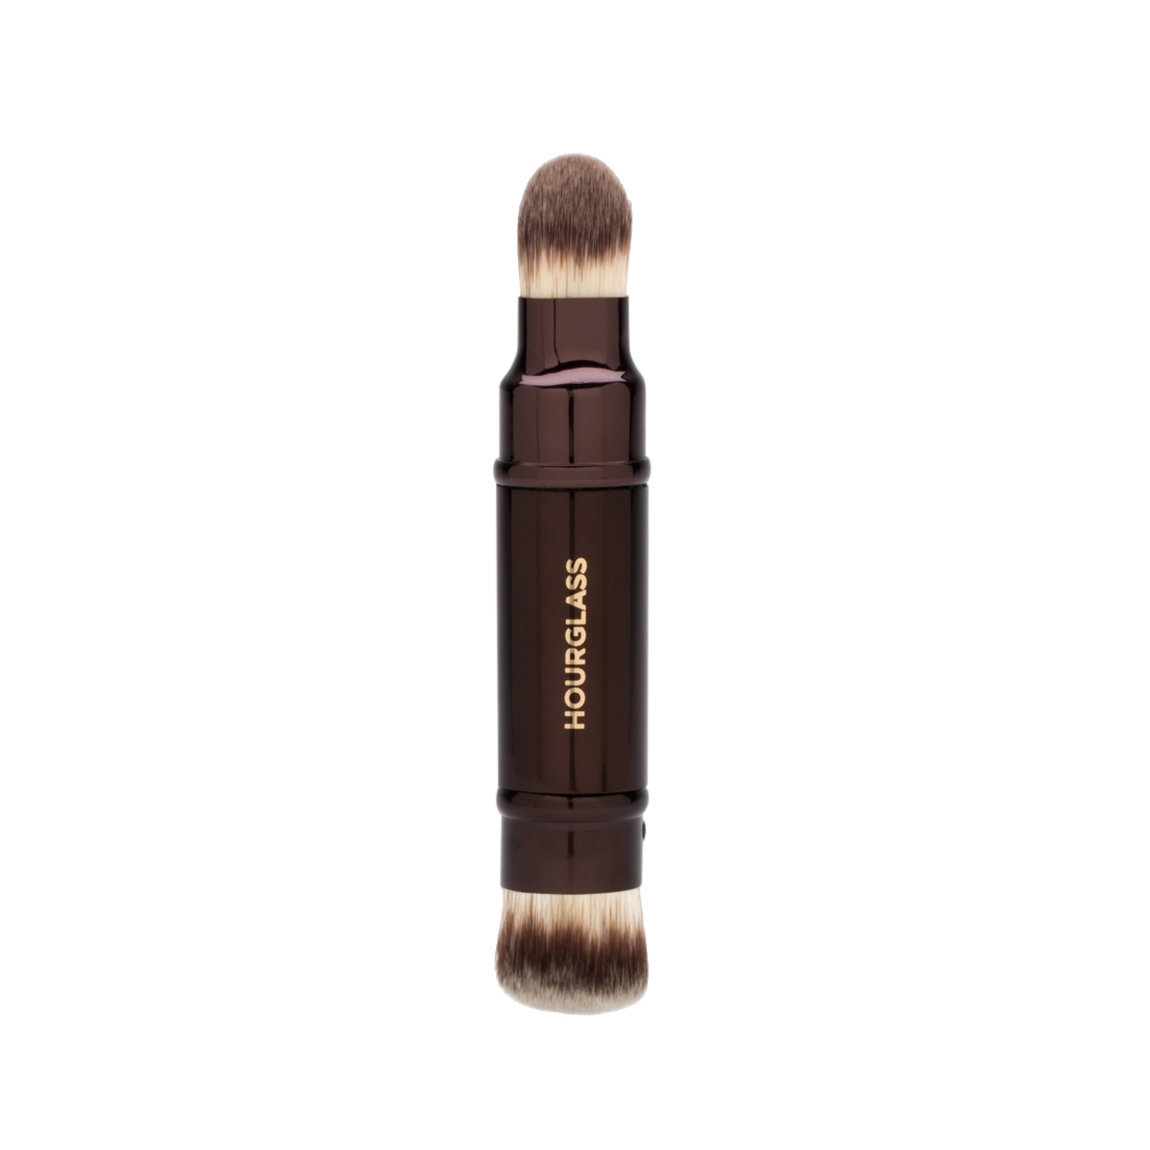 Hourglass Retractable Double-Ended Complexion Brush alternative view 1 - product swatch.